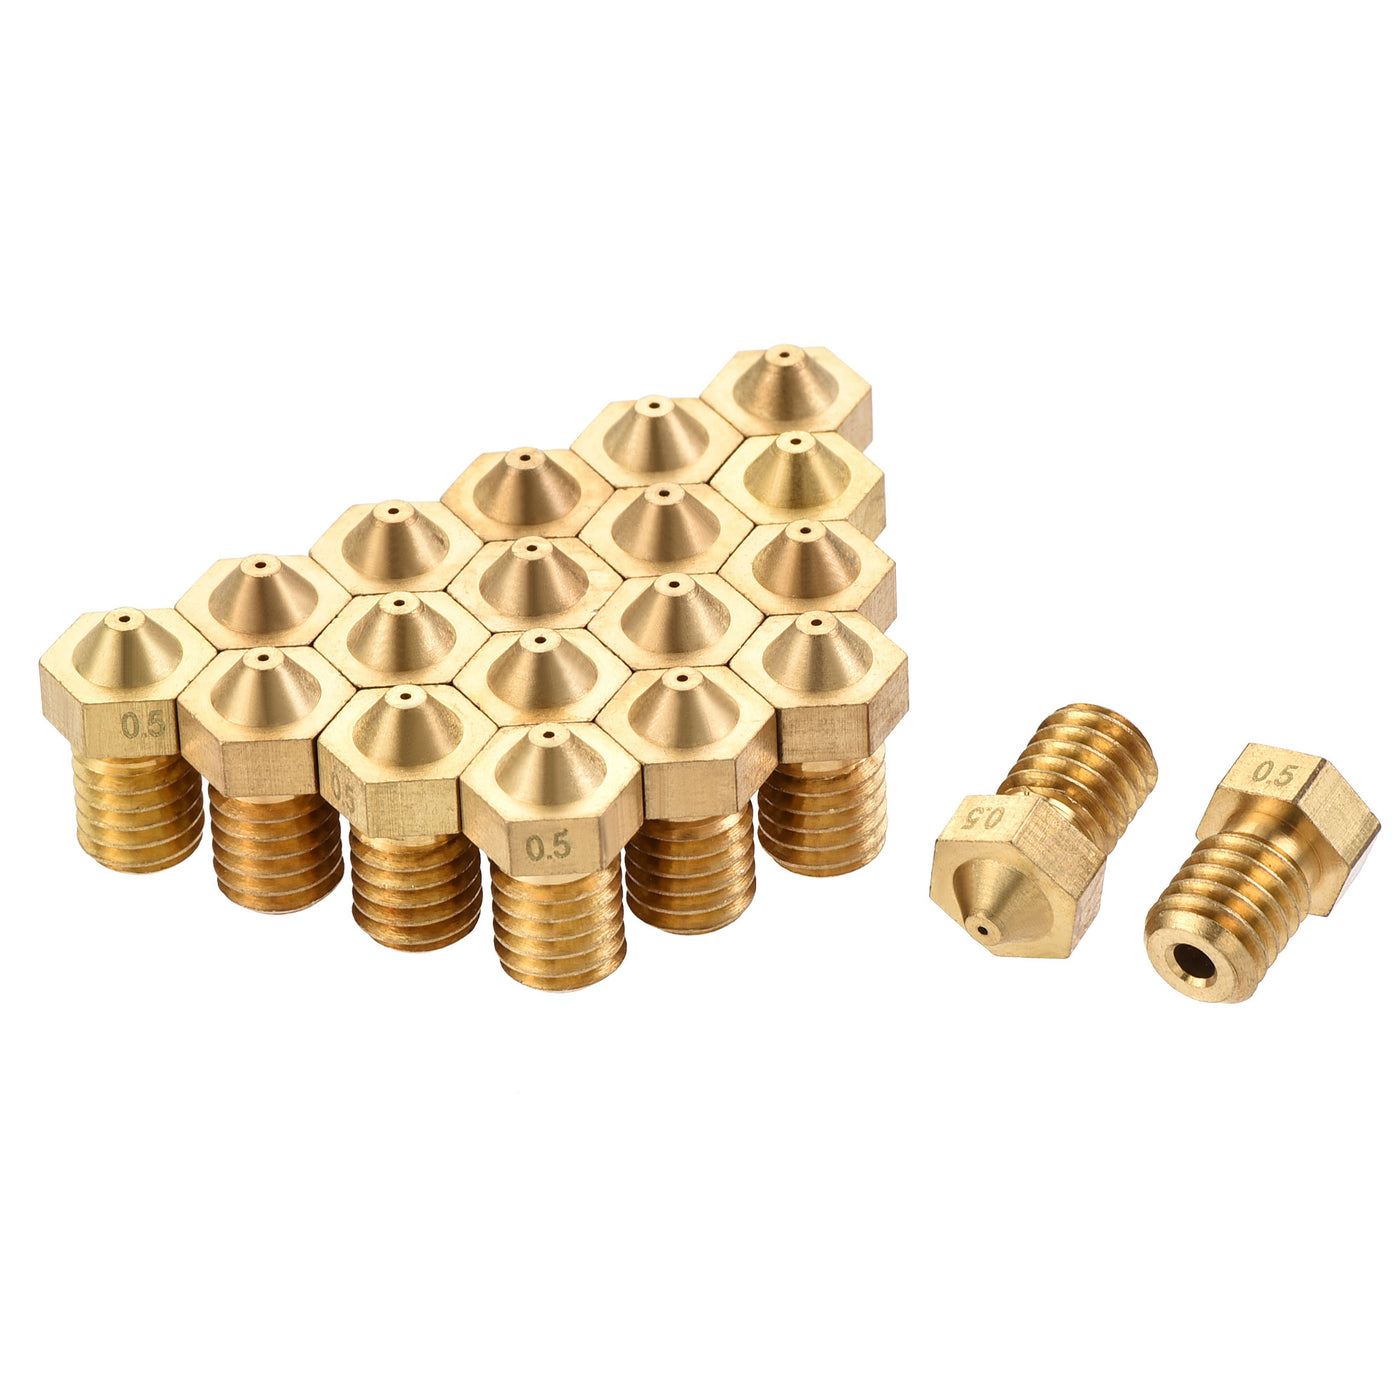 uxcell Uxcell 0.5mm 3D Printer Nozzle, 20pcs M6 Thread for V5 V6 1.75mm Extruder Print, Brass